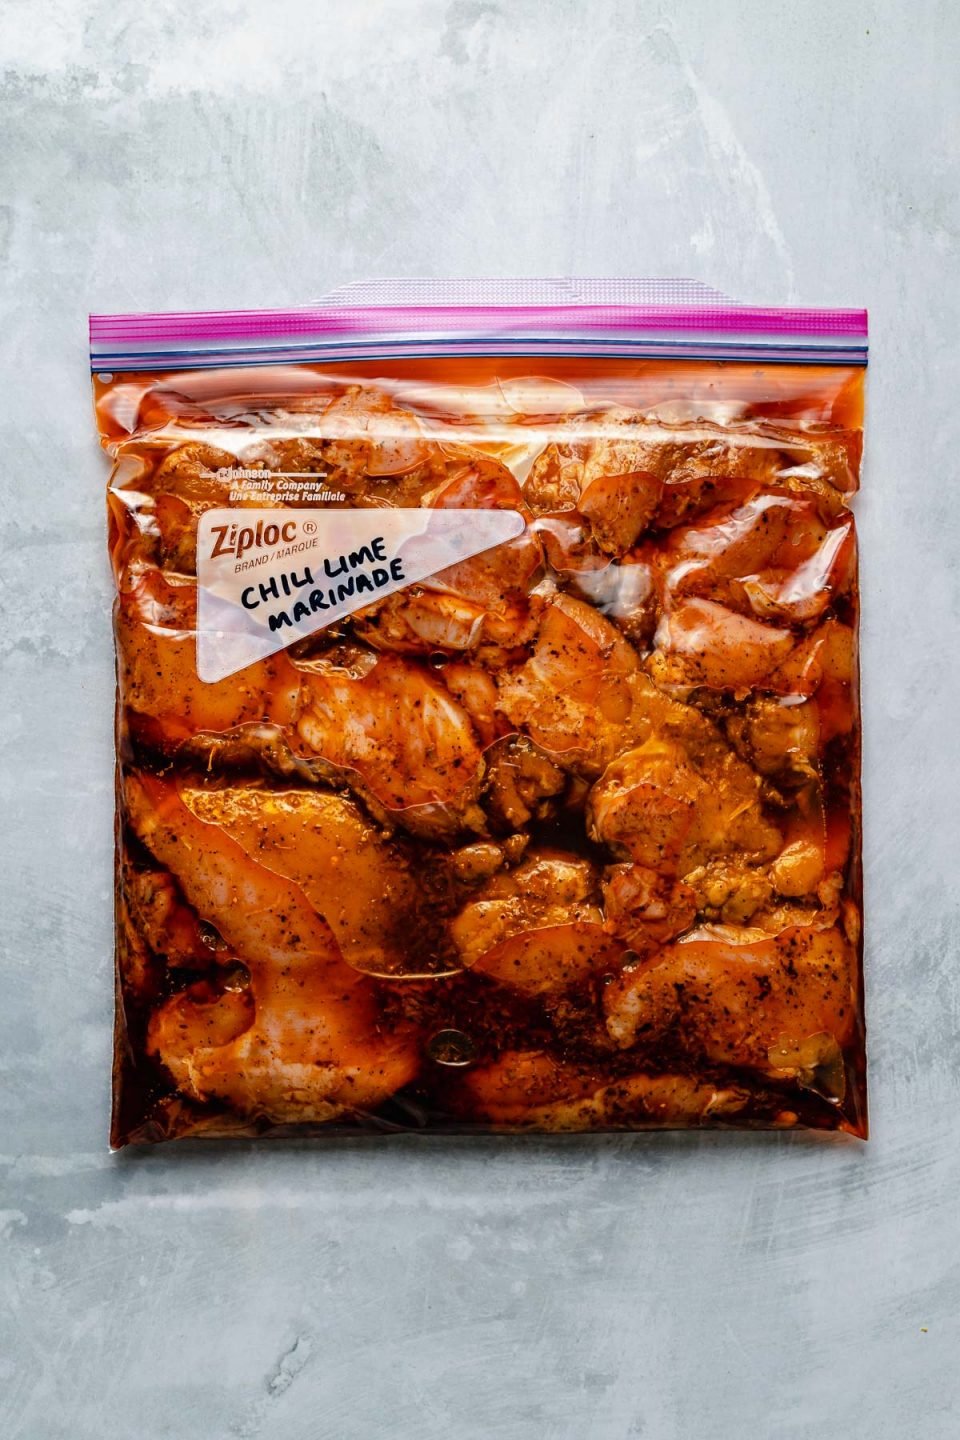 Chicken thighs in a Ziploc bag, marinating in Chili Lime marinade. The bag sits atop a light blue surface. “Chili Lime Marinade" is penned in the bag's memo area.